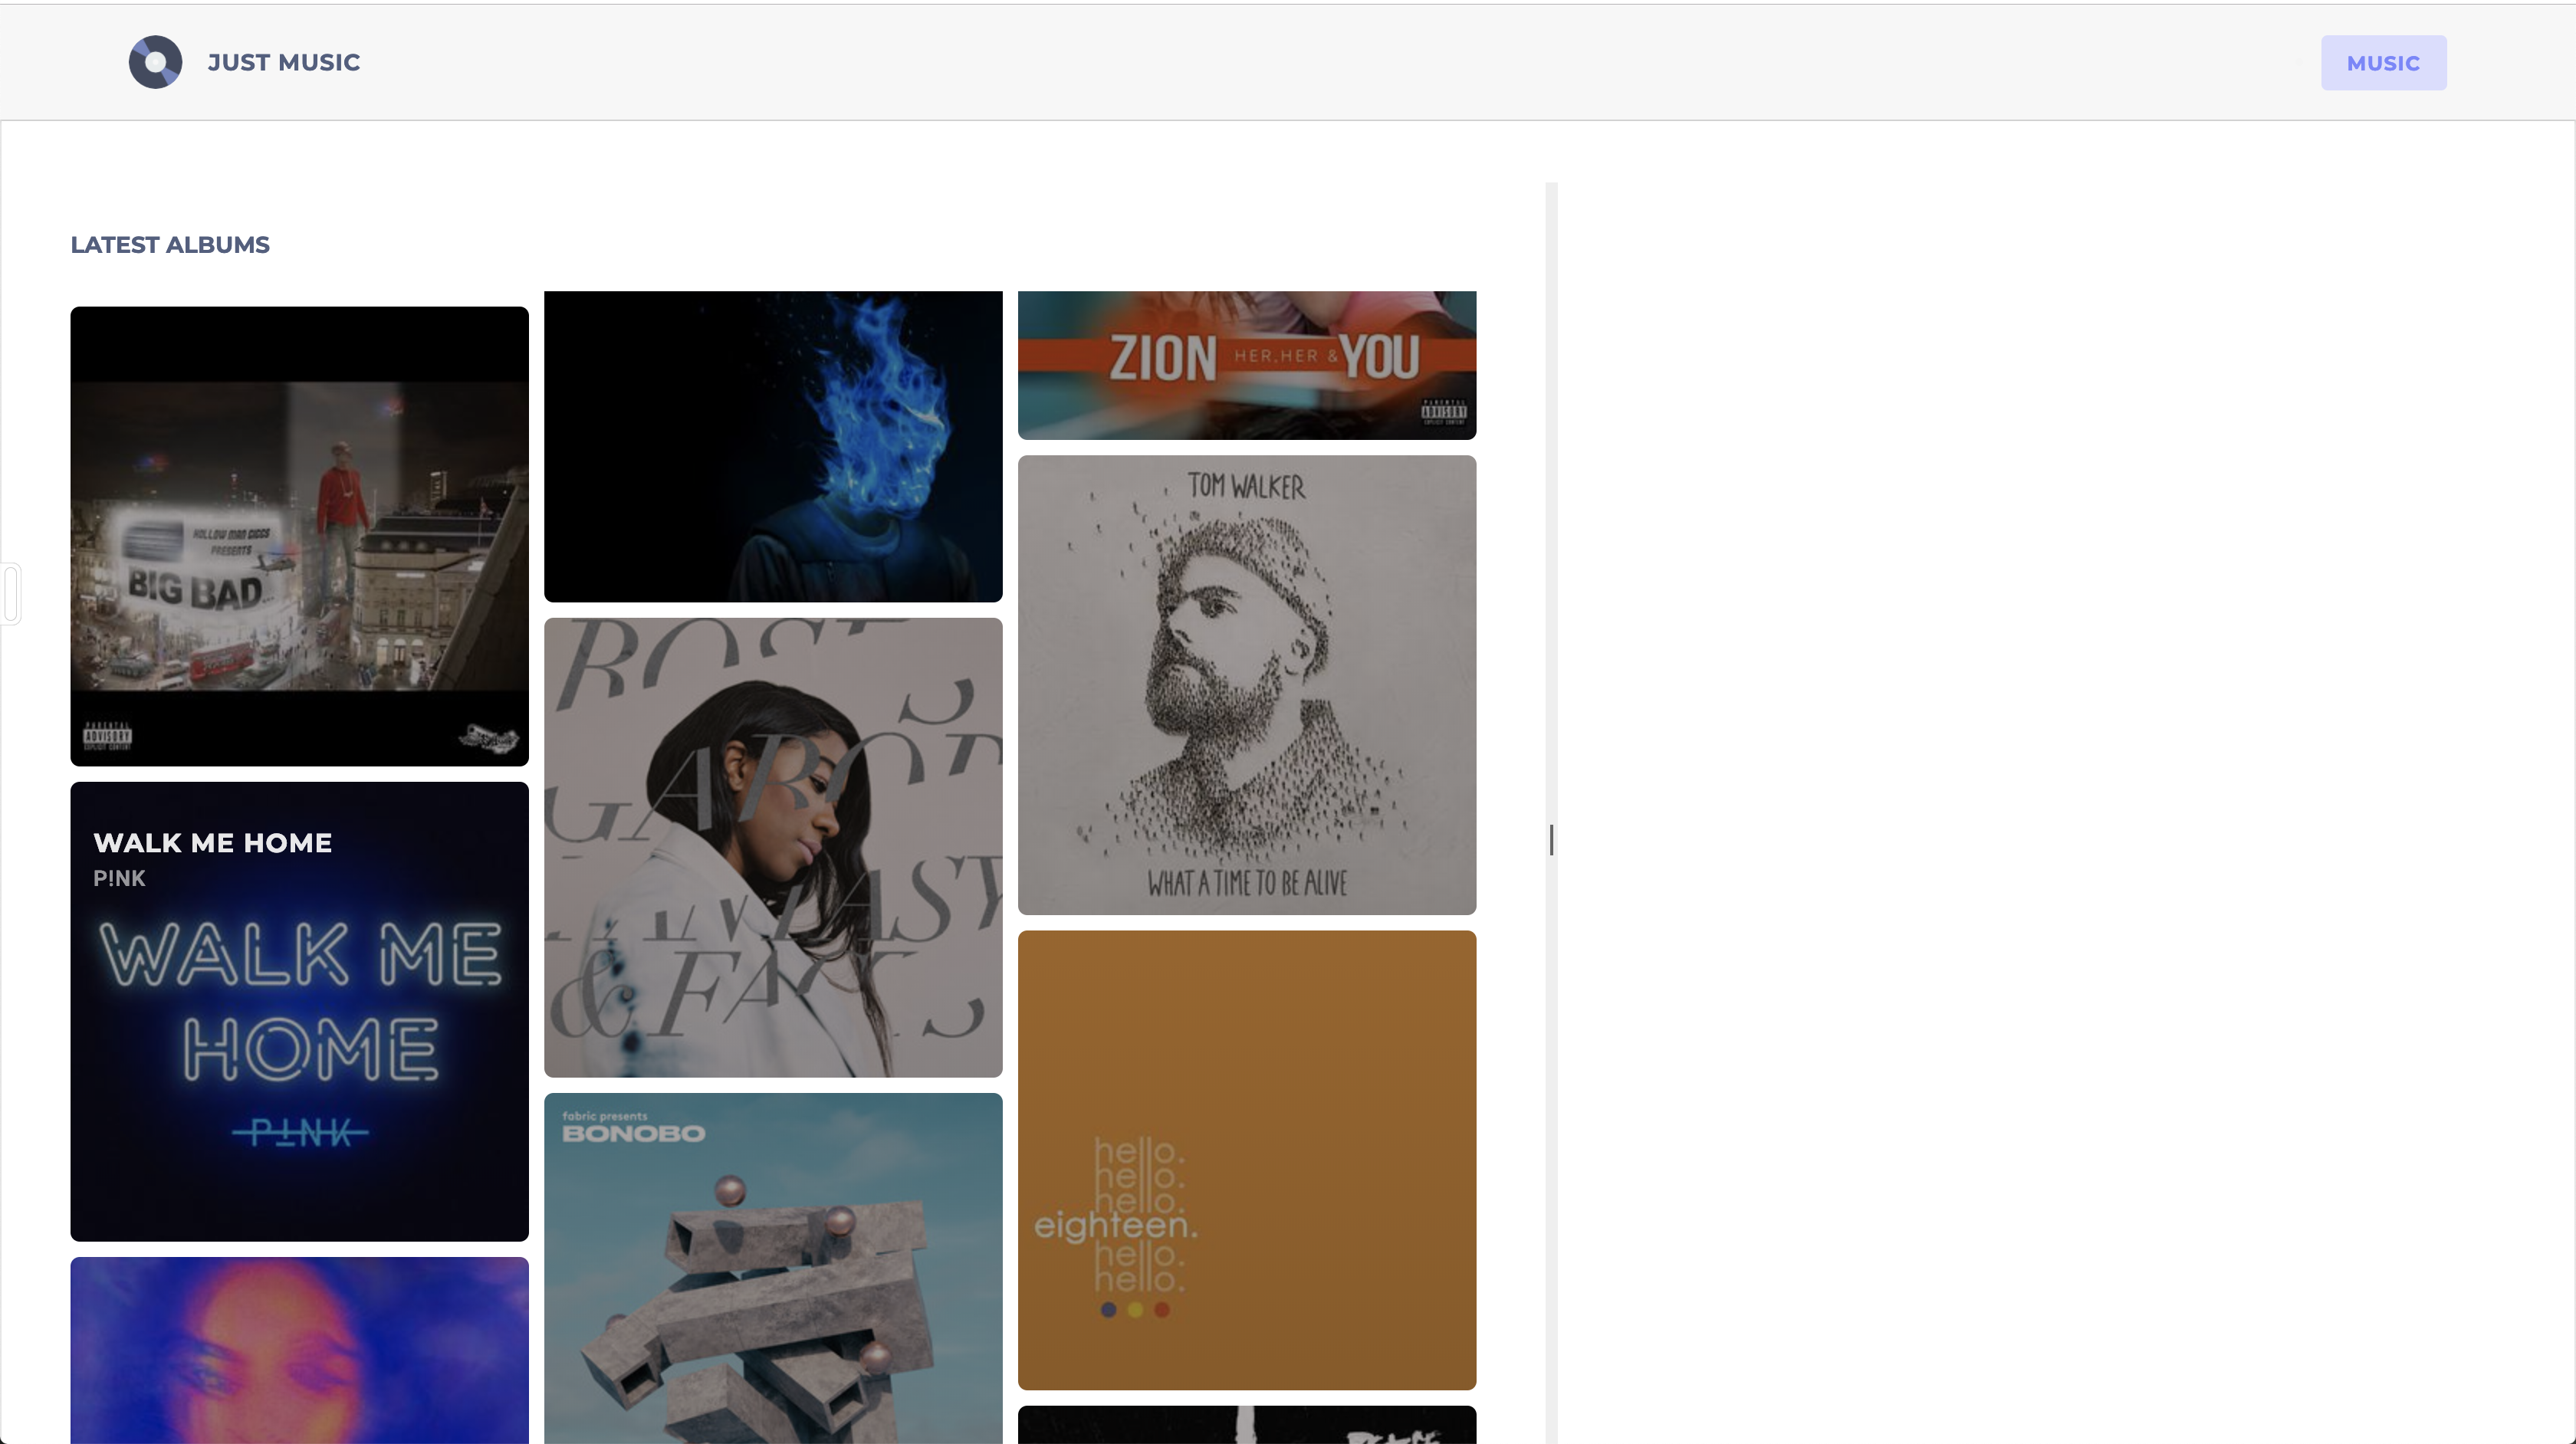 application on the browser showing us the albums listed